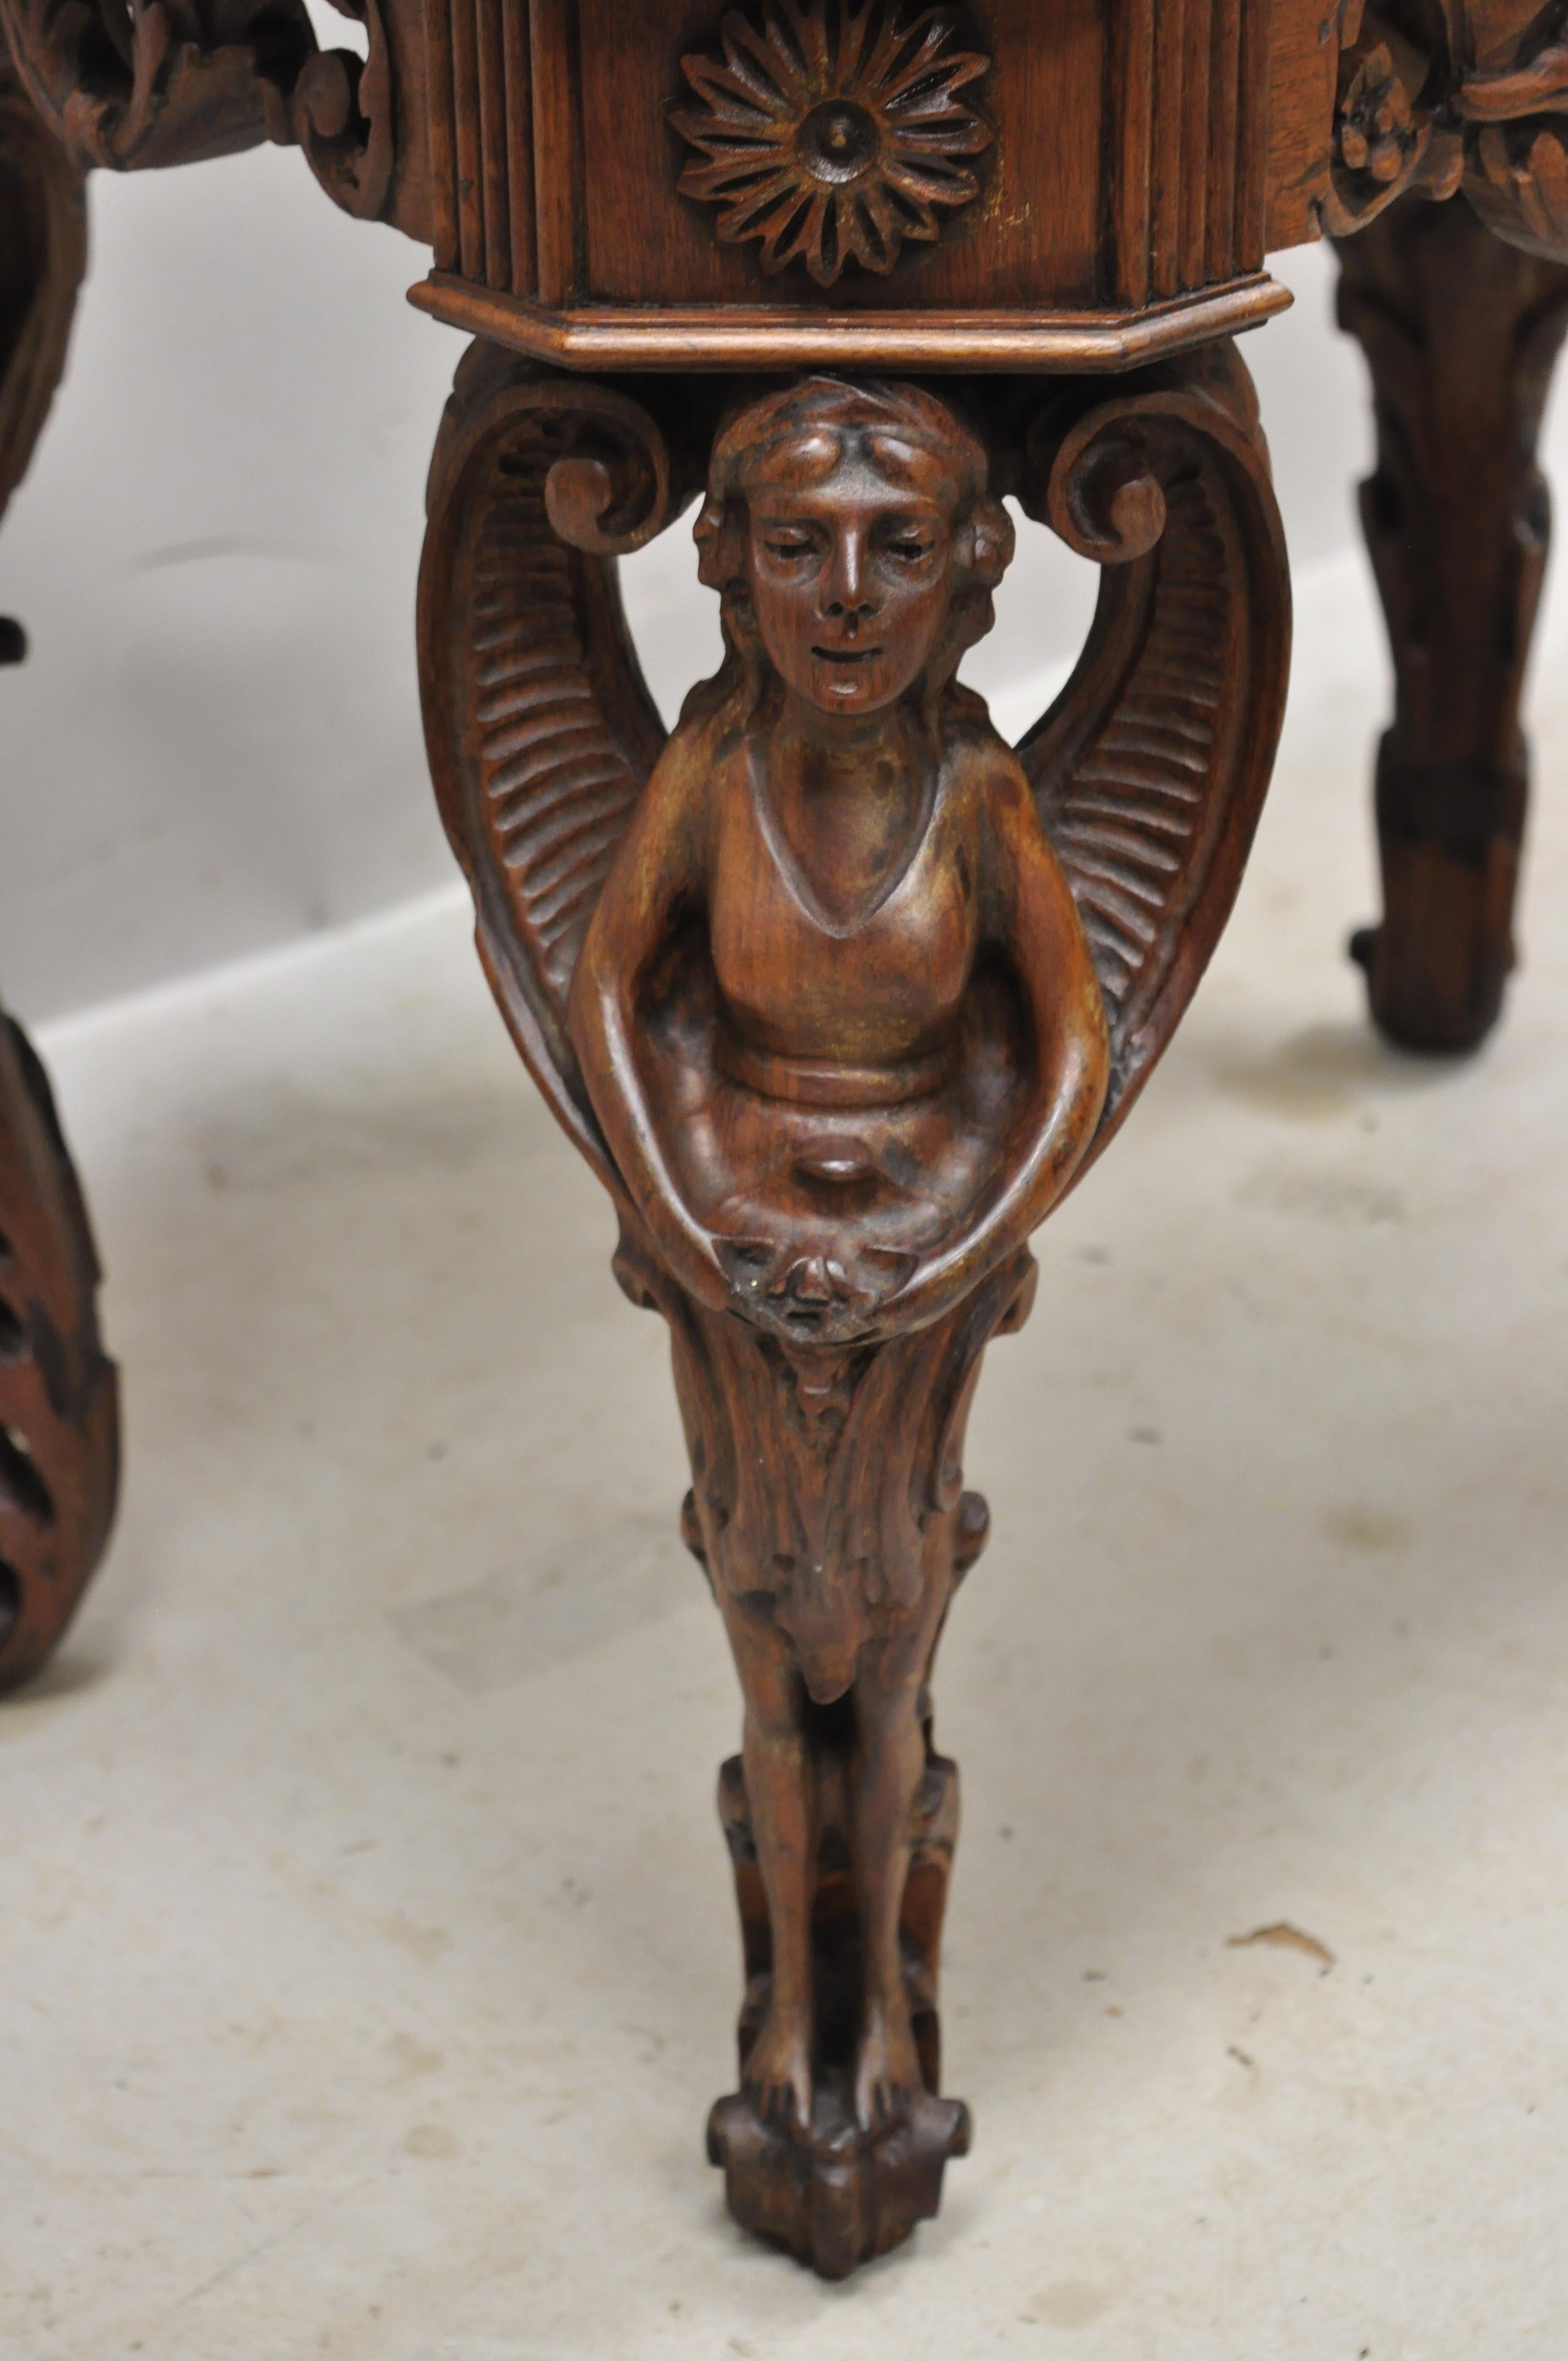 North American Carved Walnut French Renaissance Small Figural Coffee Table with Winged Maidens